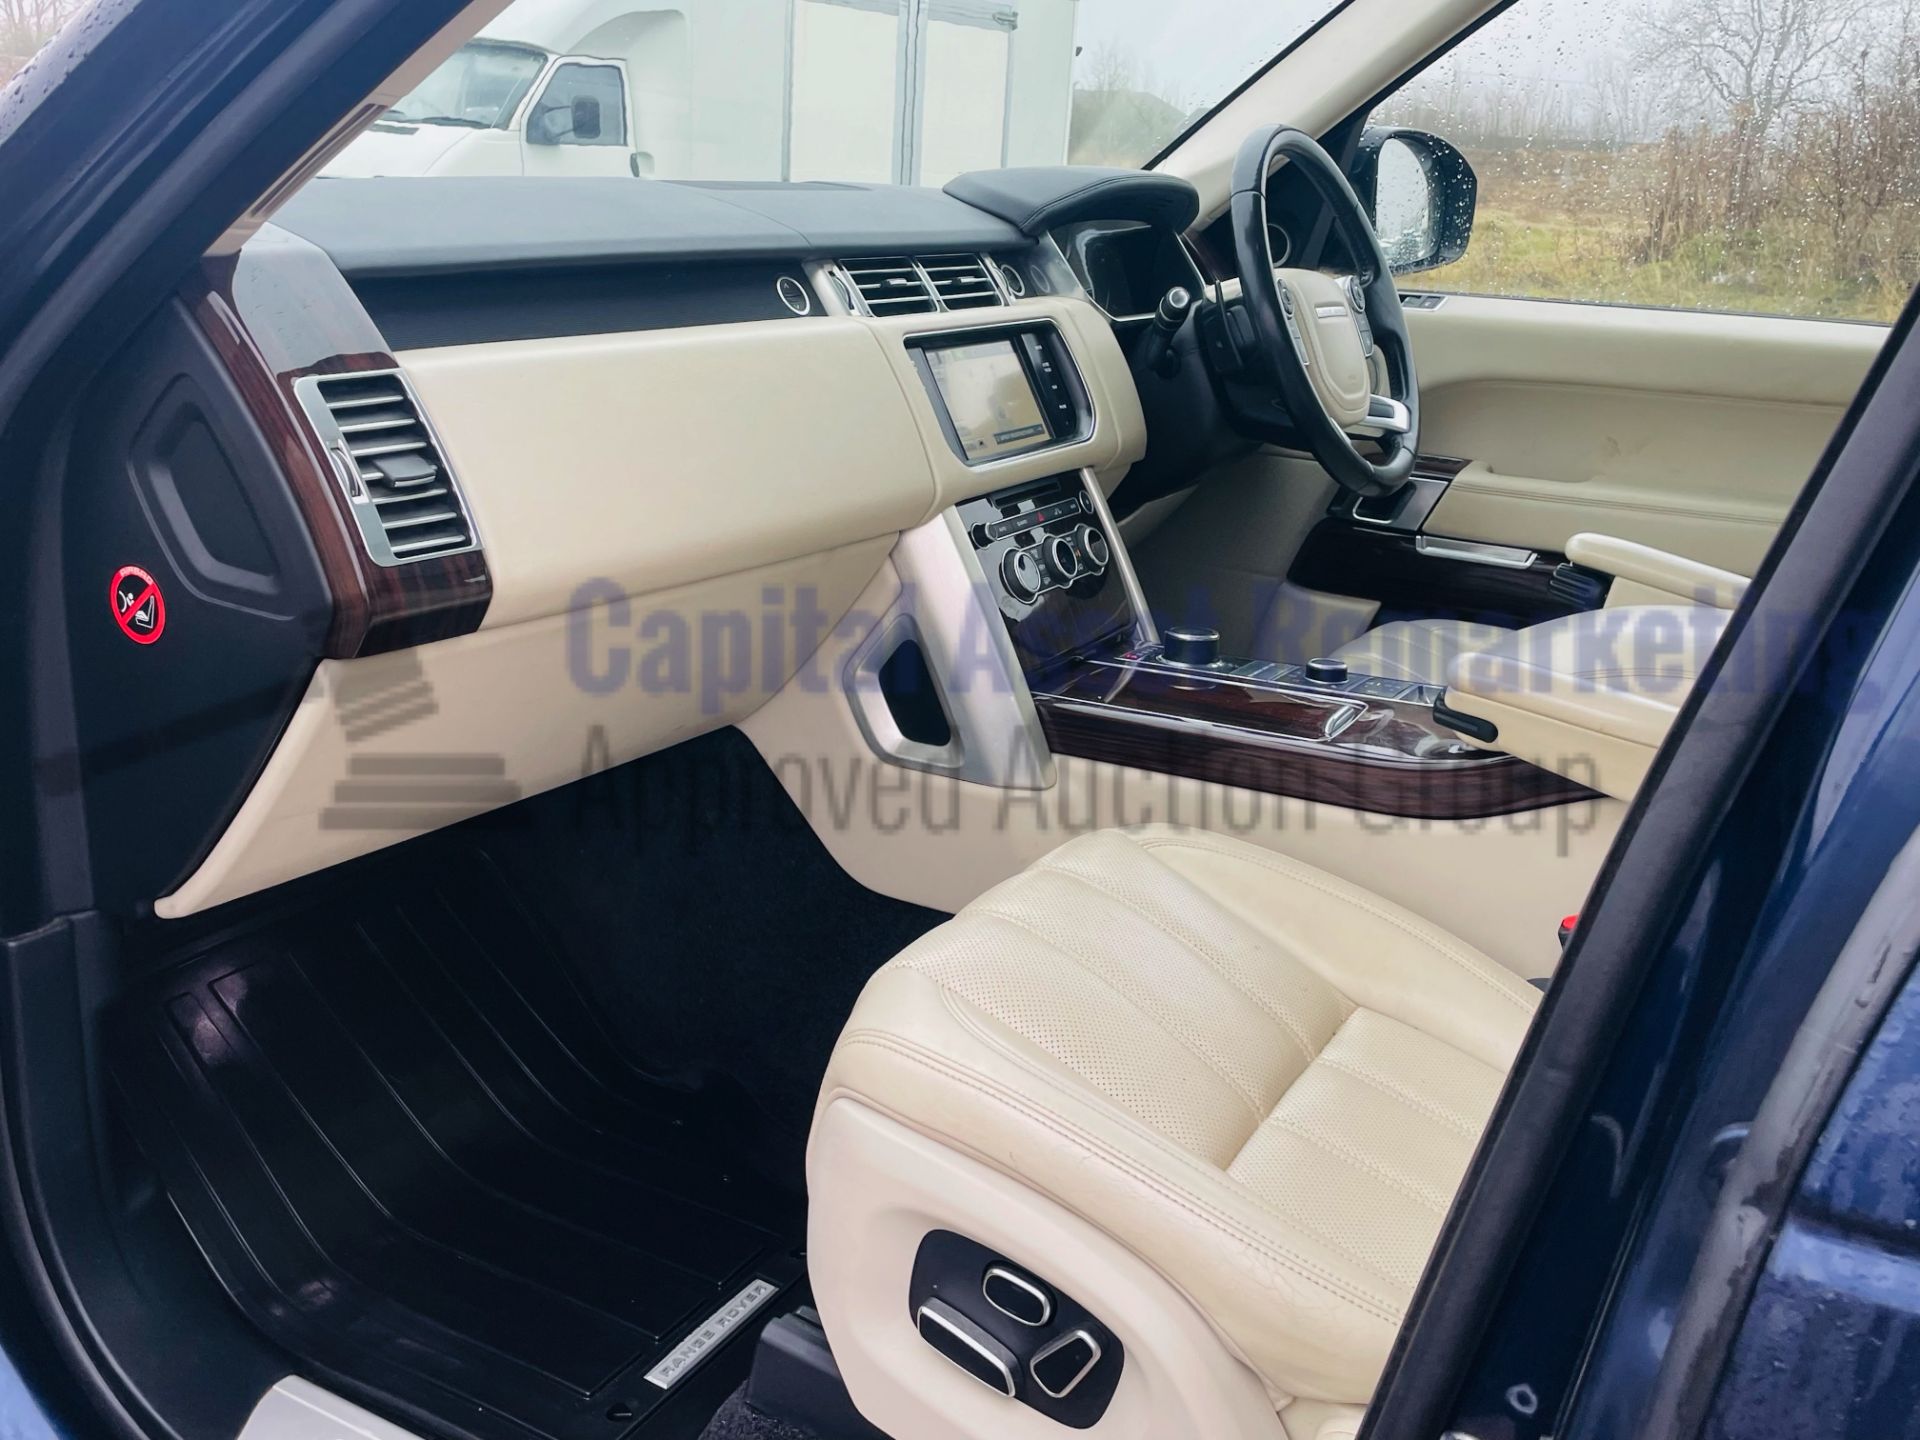 (On Sale) RANGE ROVER VOGUE *5 DOOR SUV* (2014 - NEW MODEL) '4.4 SDV8 - 8 SPEED AUTO' *FULLY LOADED* - Image 25 of 68